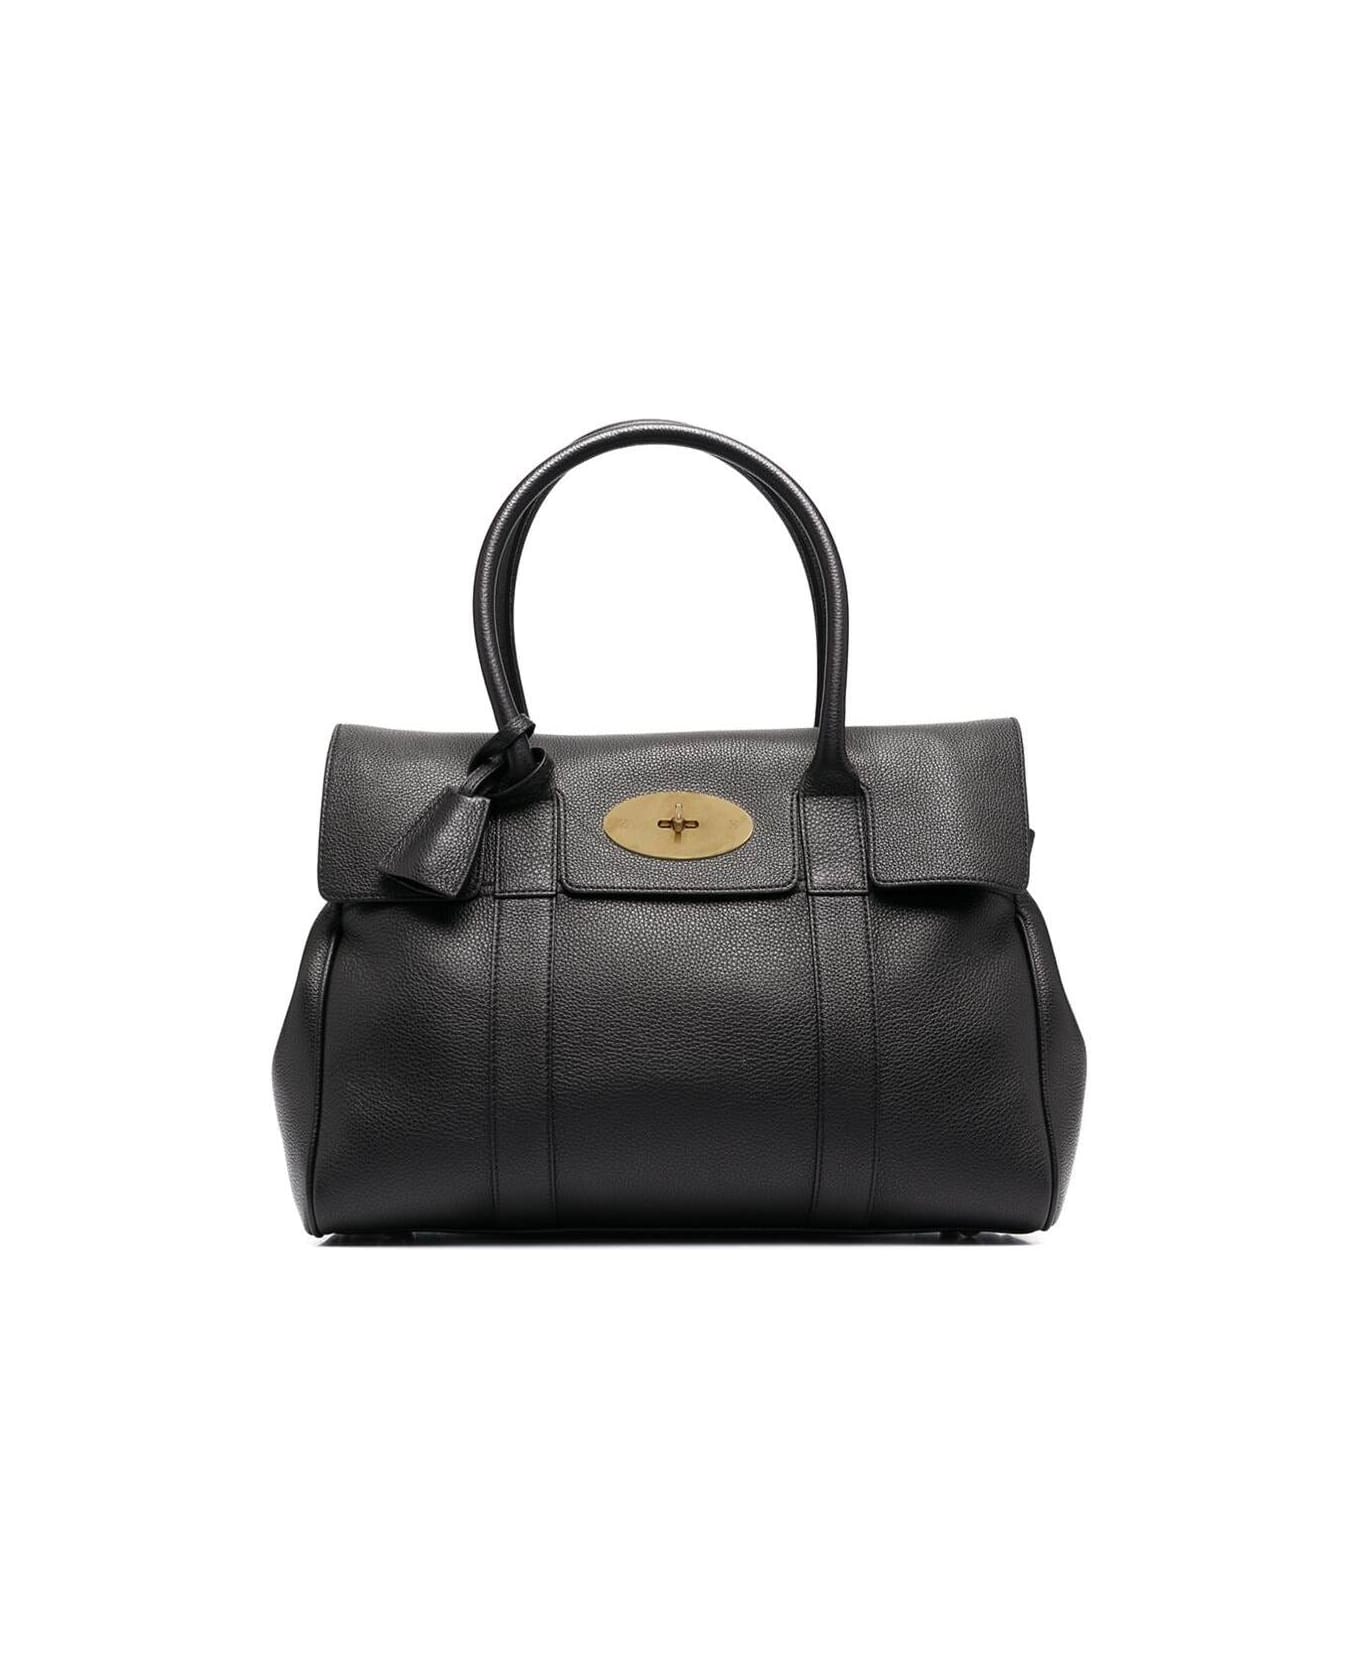 Mulberry 'bayswater' Black Handbag With Twist-lock Fastening In Grainy Leather Woman - Black トートバッグ